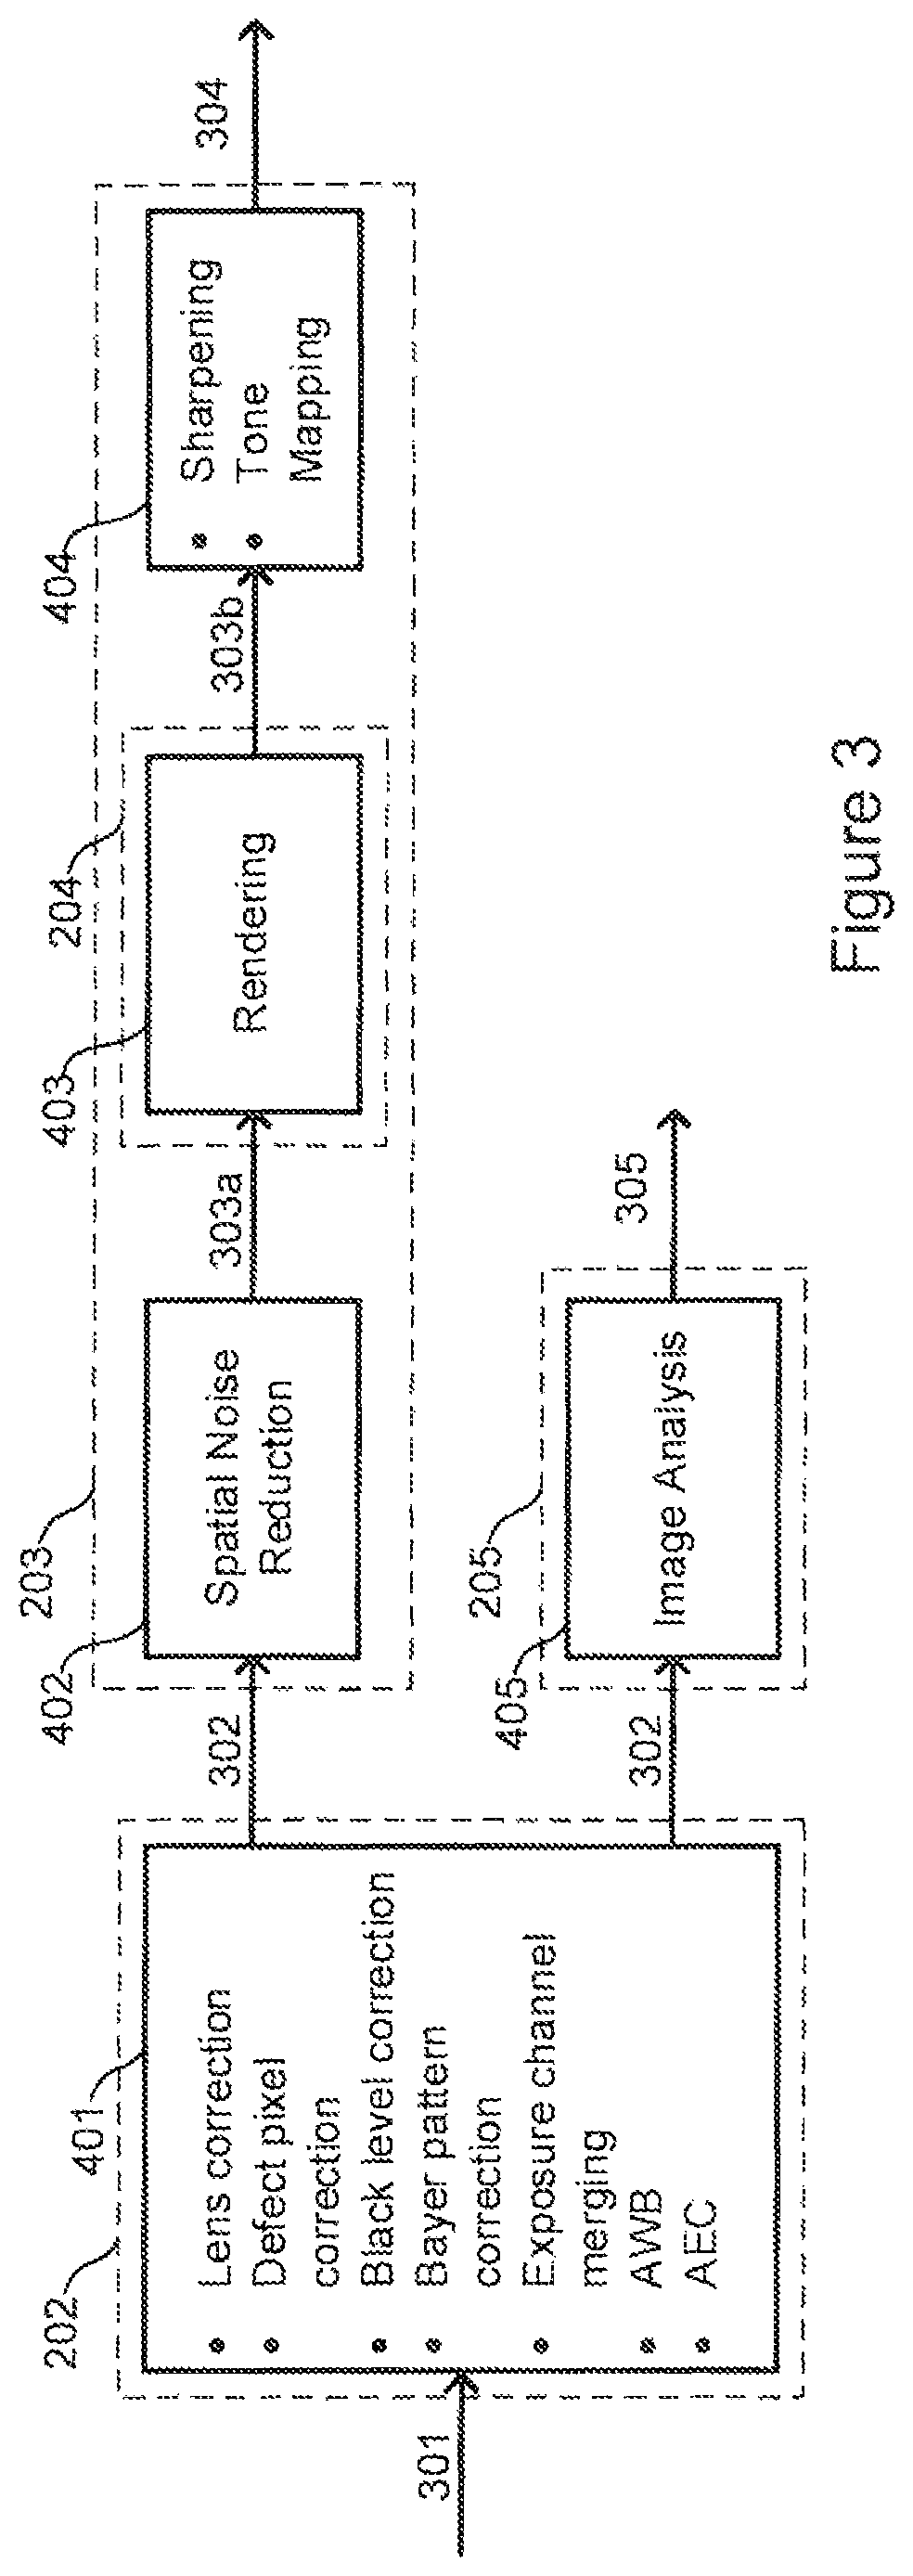 Image processor and method for image processing